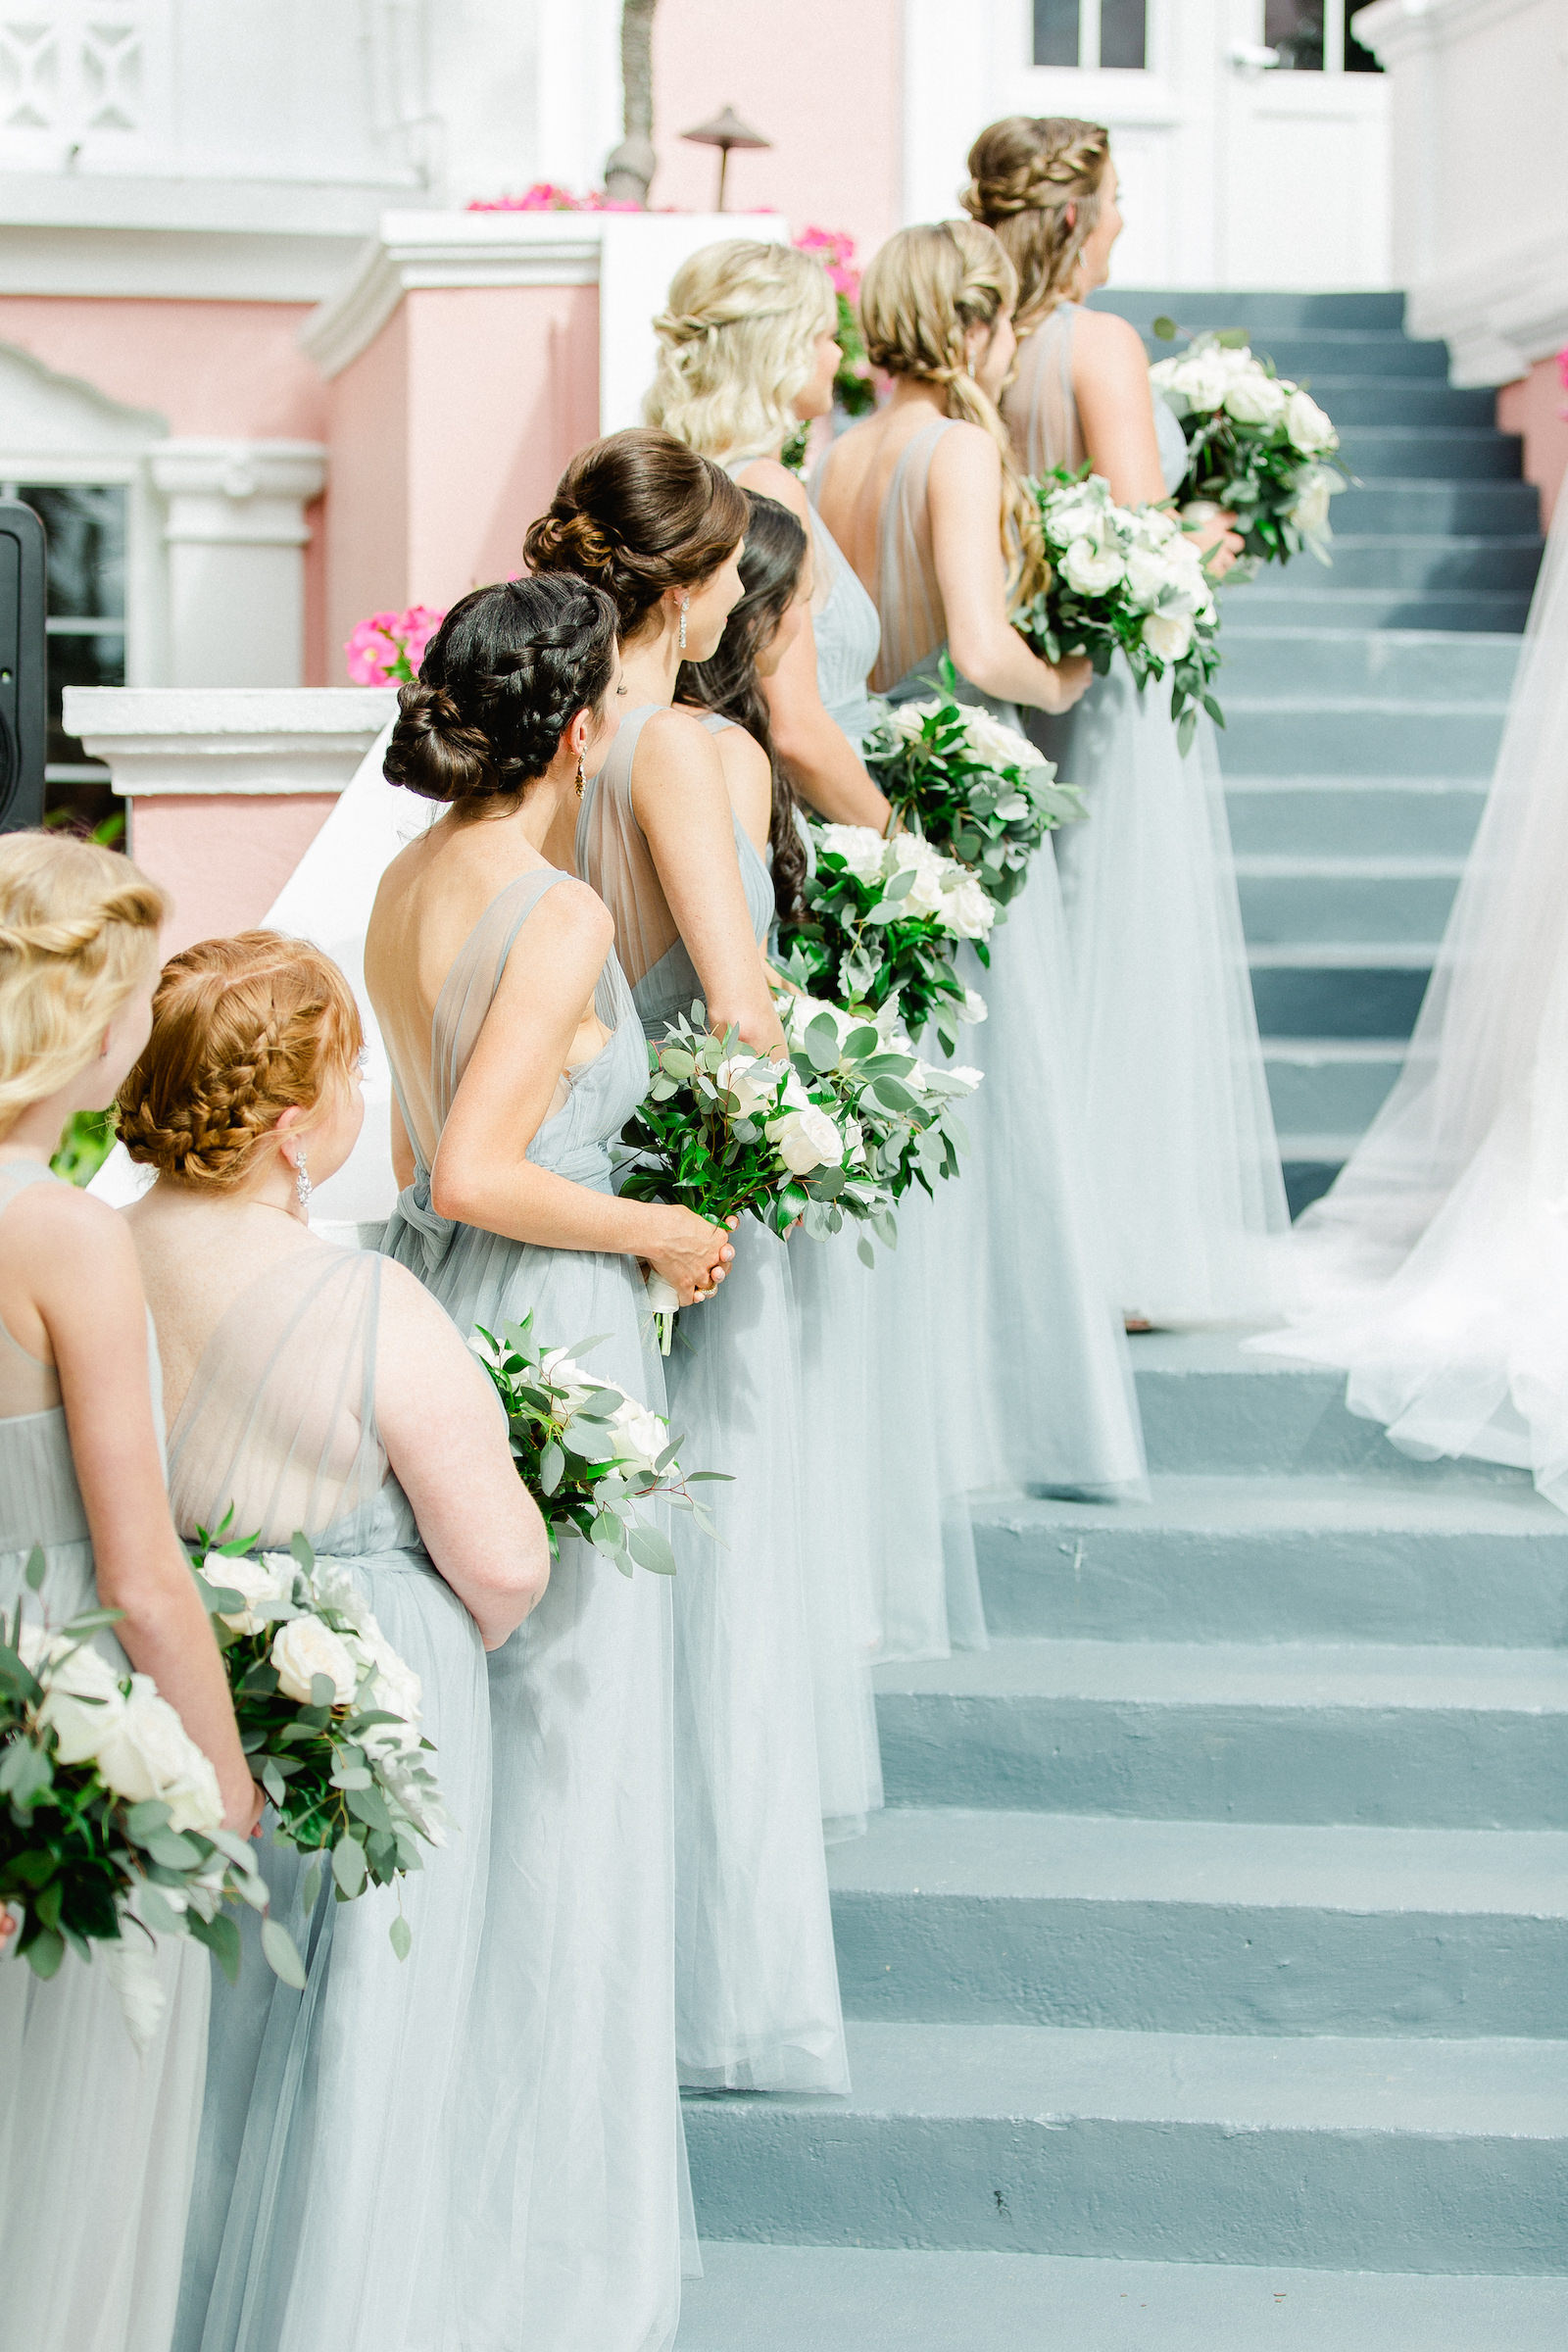 Staircase Wedding Ceremony | Dusty Blue Grey Tulle Bridesmaid Dresses | St Pete Beach Wedding Venue The Don Cesar | Classic Greenery White Flowers Bouquets | Isabel O'Neil Bridal Collection | Bella Bridesmaids